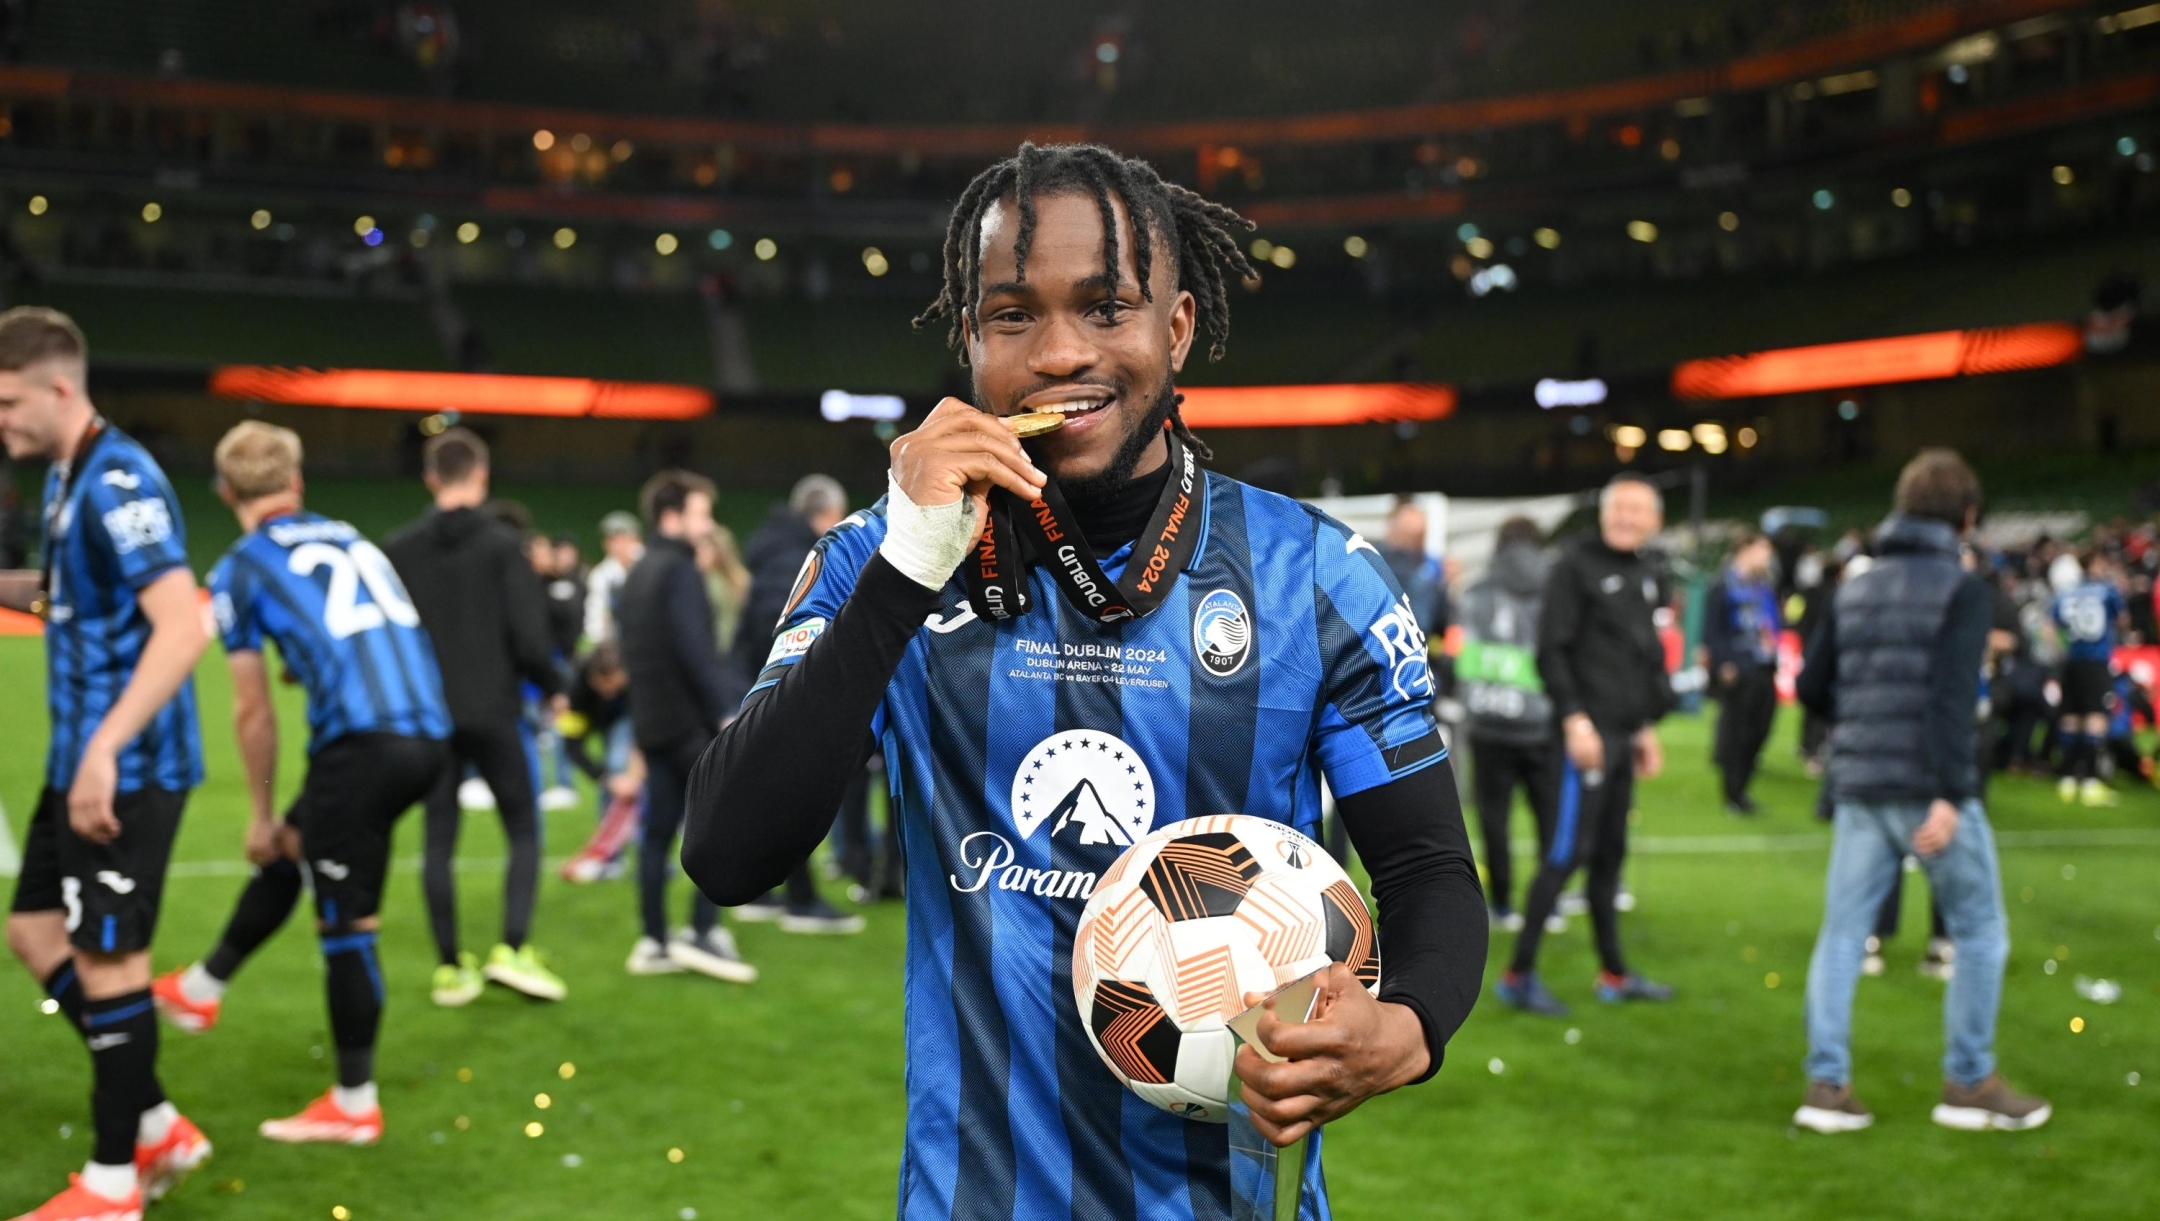 DUBLIN, IRELAND - MAY 22: Ademola Lookman of Atalanta BC bites their winner's medal as he poses for a photograph with the Match Ball after scoring a hat-trick and the Hankook Tyres Player of the Match award after defeating Bayer 04 Leverkusen during the UEFA Europa League 2023/24 final match between Atalanta BC and Bayer 04 Leverkusen at Dublin Arena on May 22, 2024 in Dublin, Ireland. (Photo by Michael Regan/Getty Images)